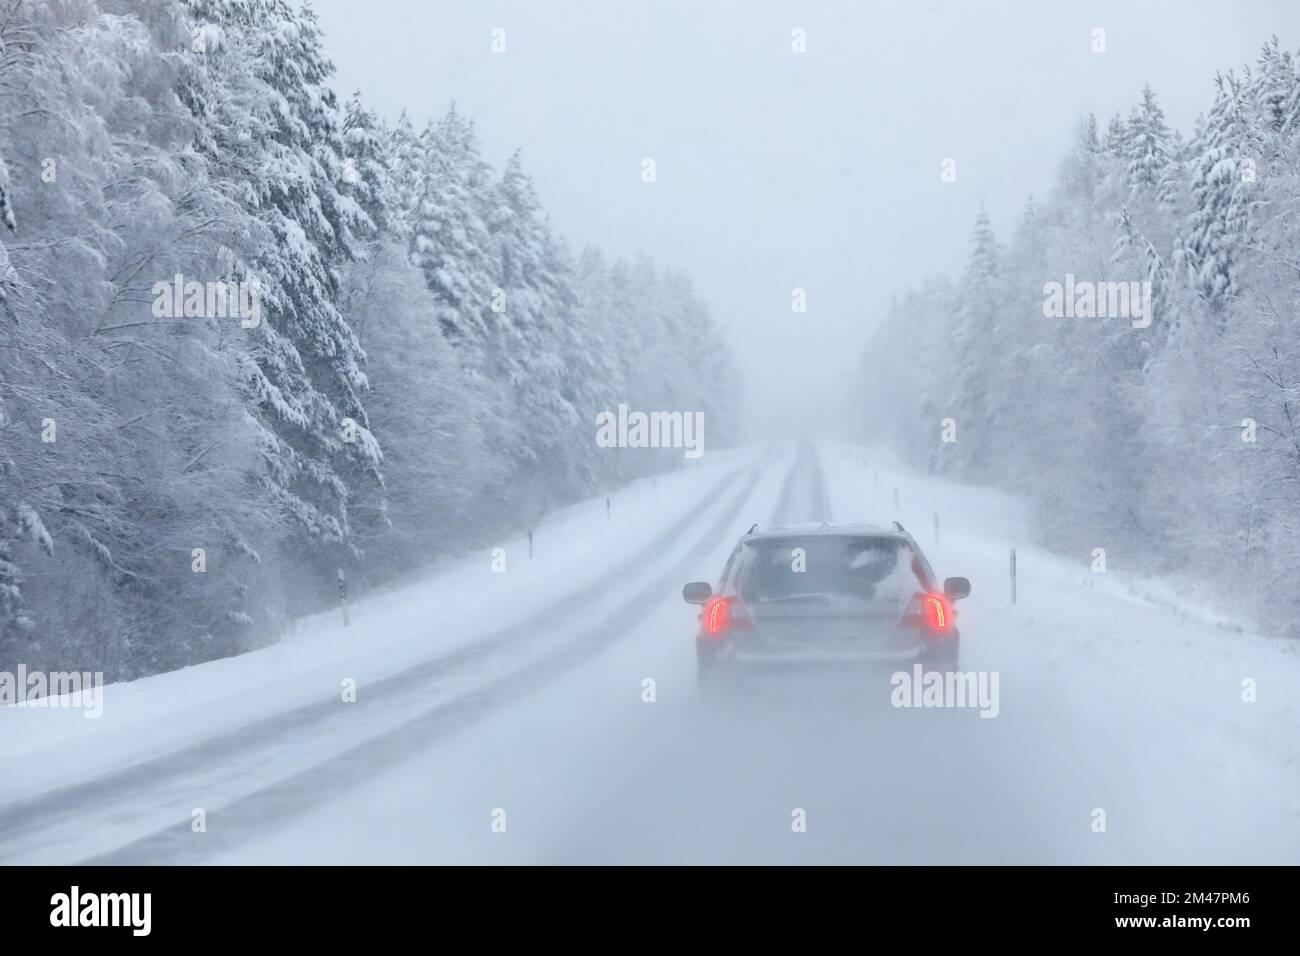 Cars in heavy snowstorm with weak visibility Stock Photo